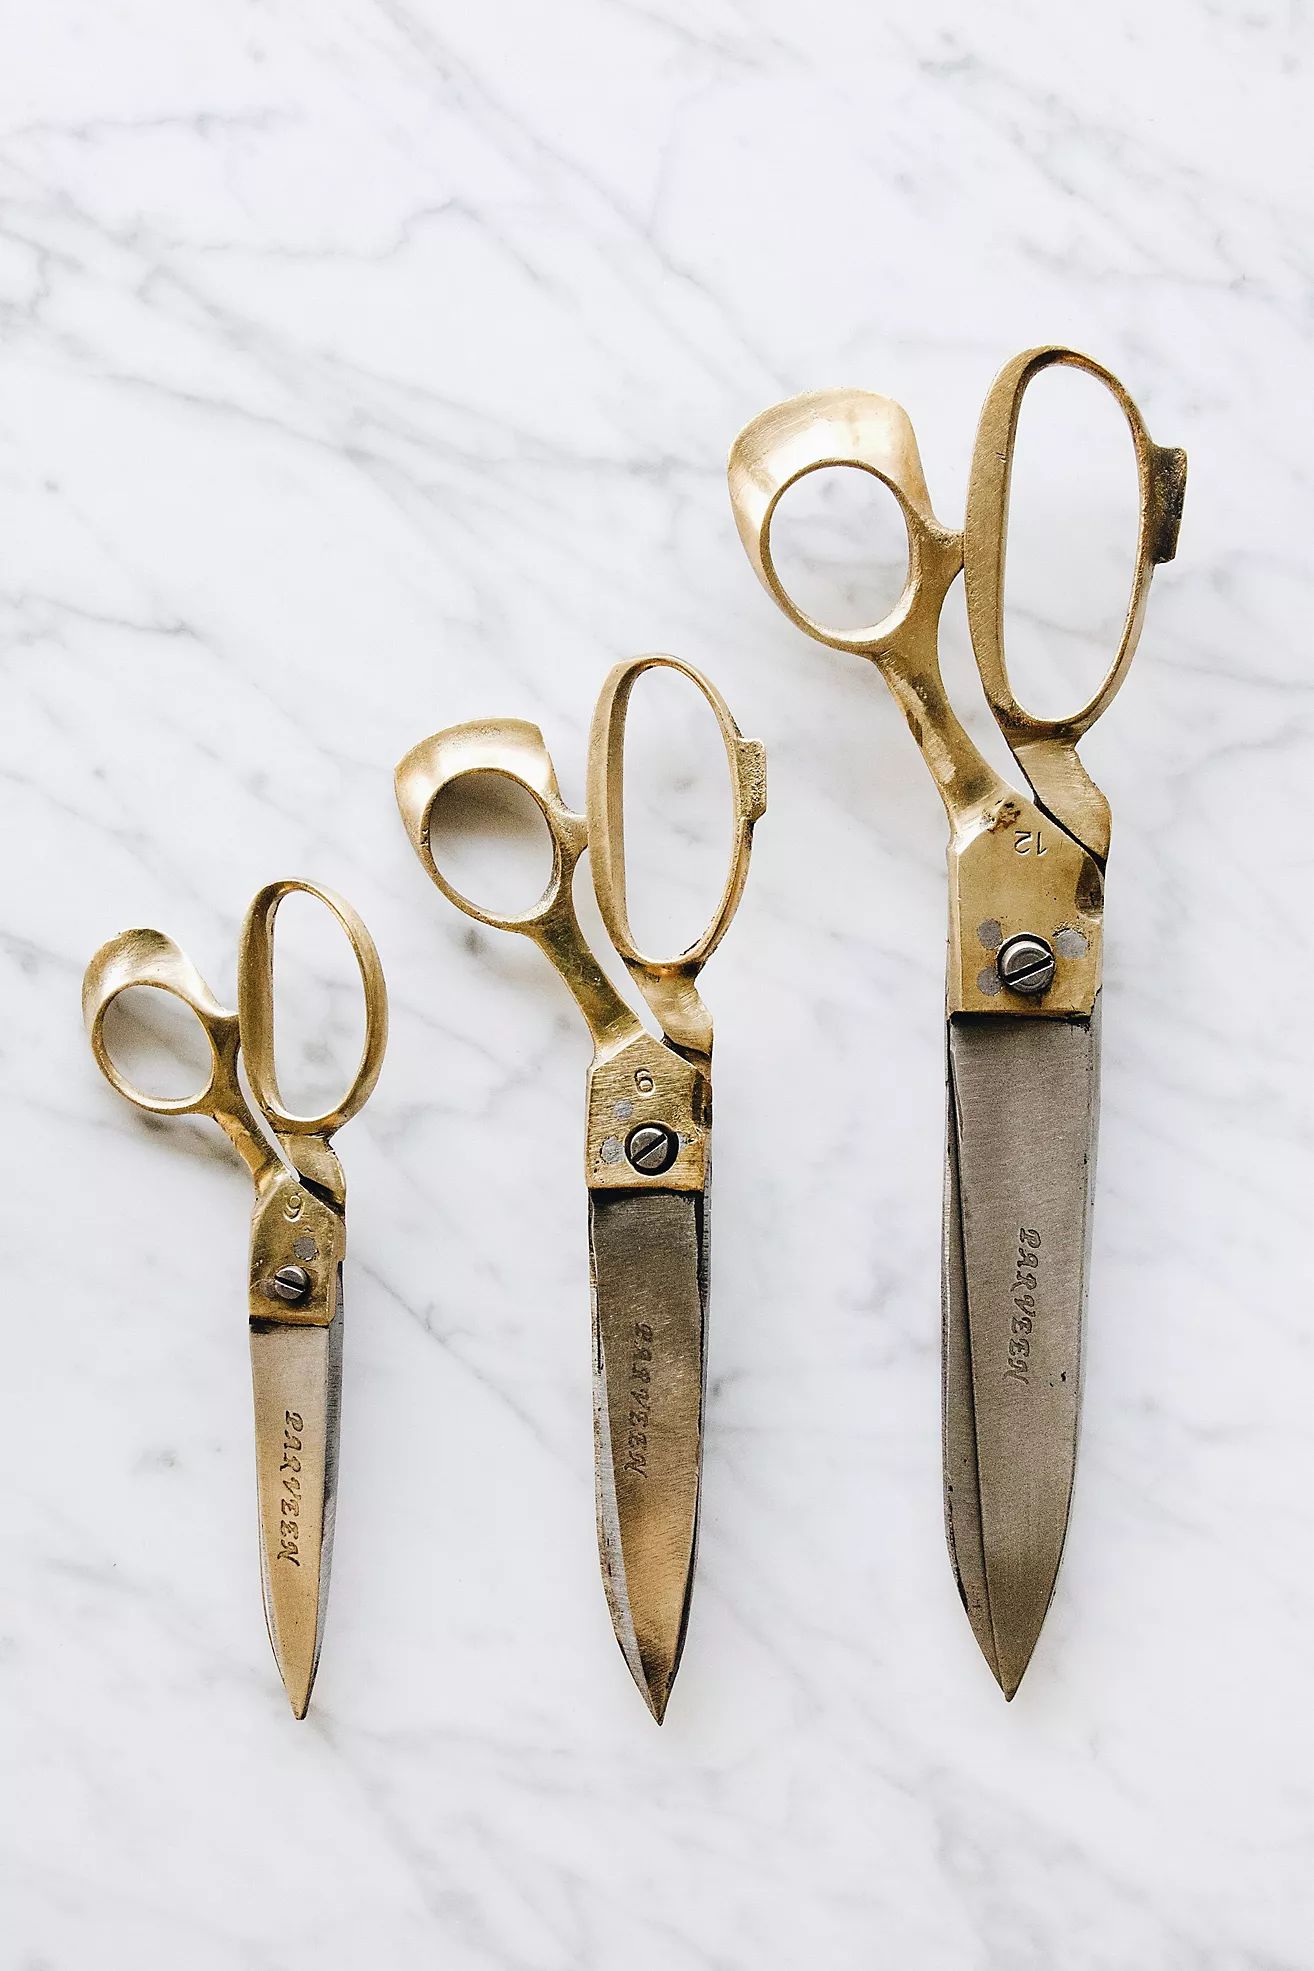 Connected Goods Handcrafted Shears | Anthropologie (US)